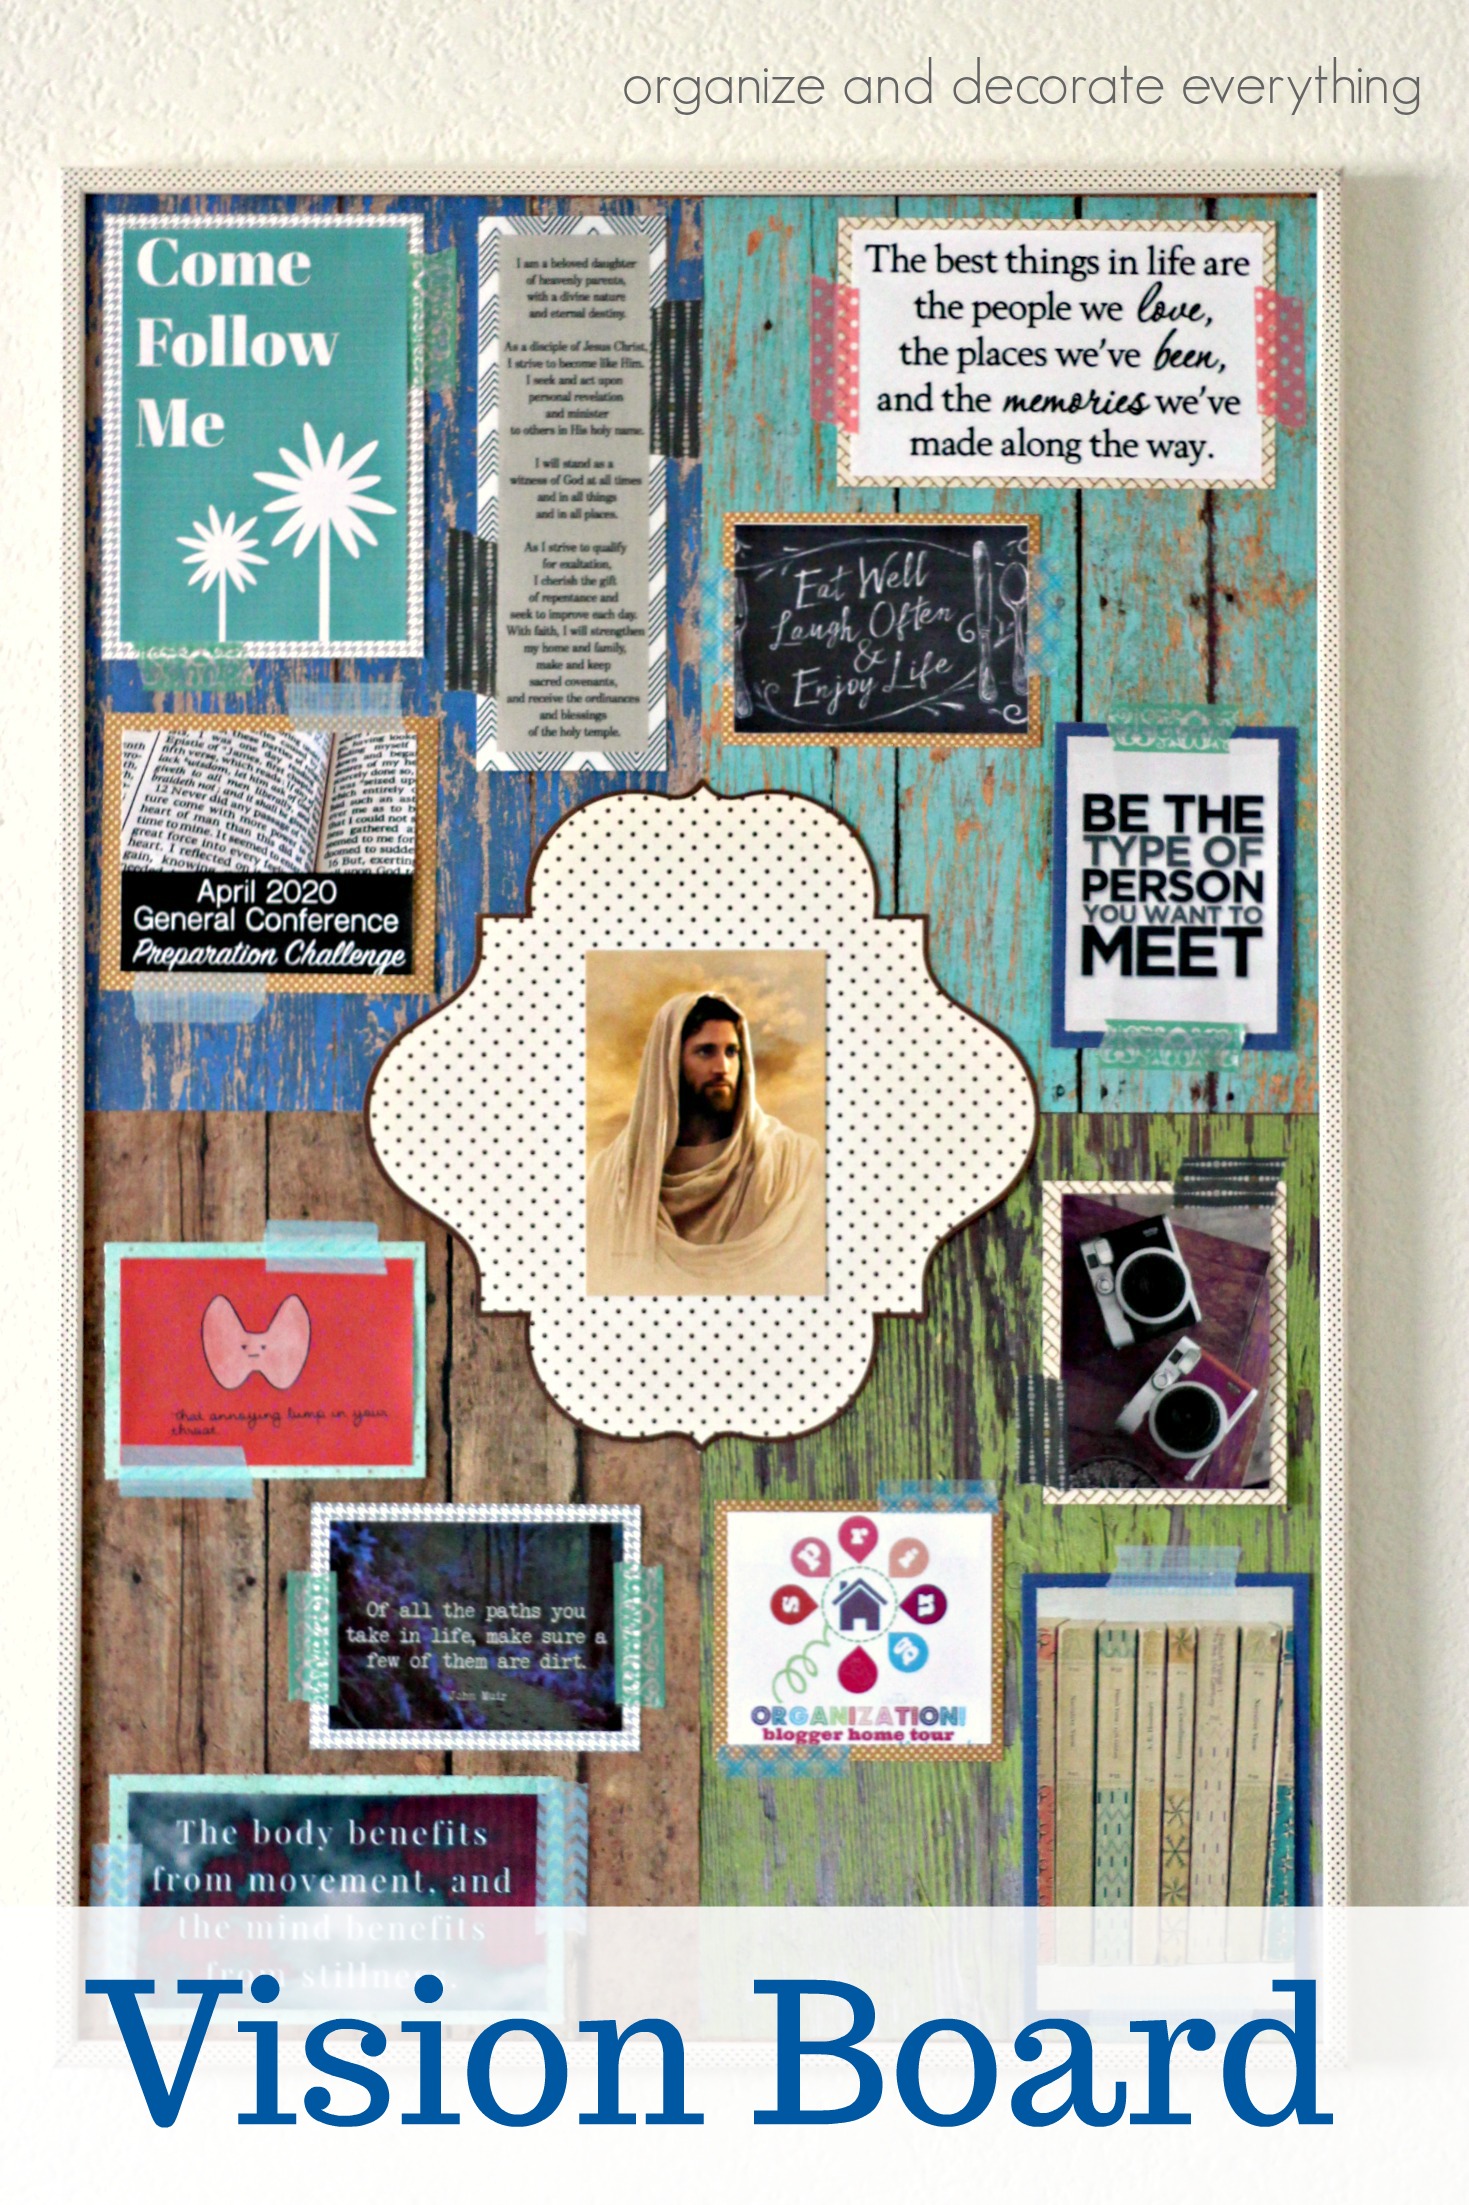 Creating a Vision Board - Organize and Decorate Everything